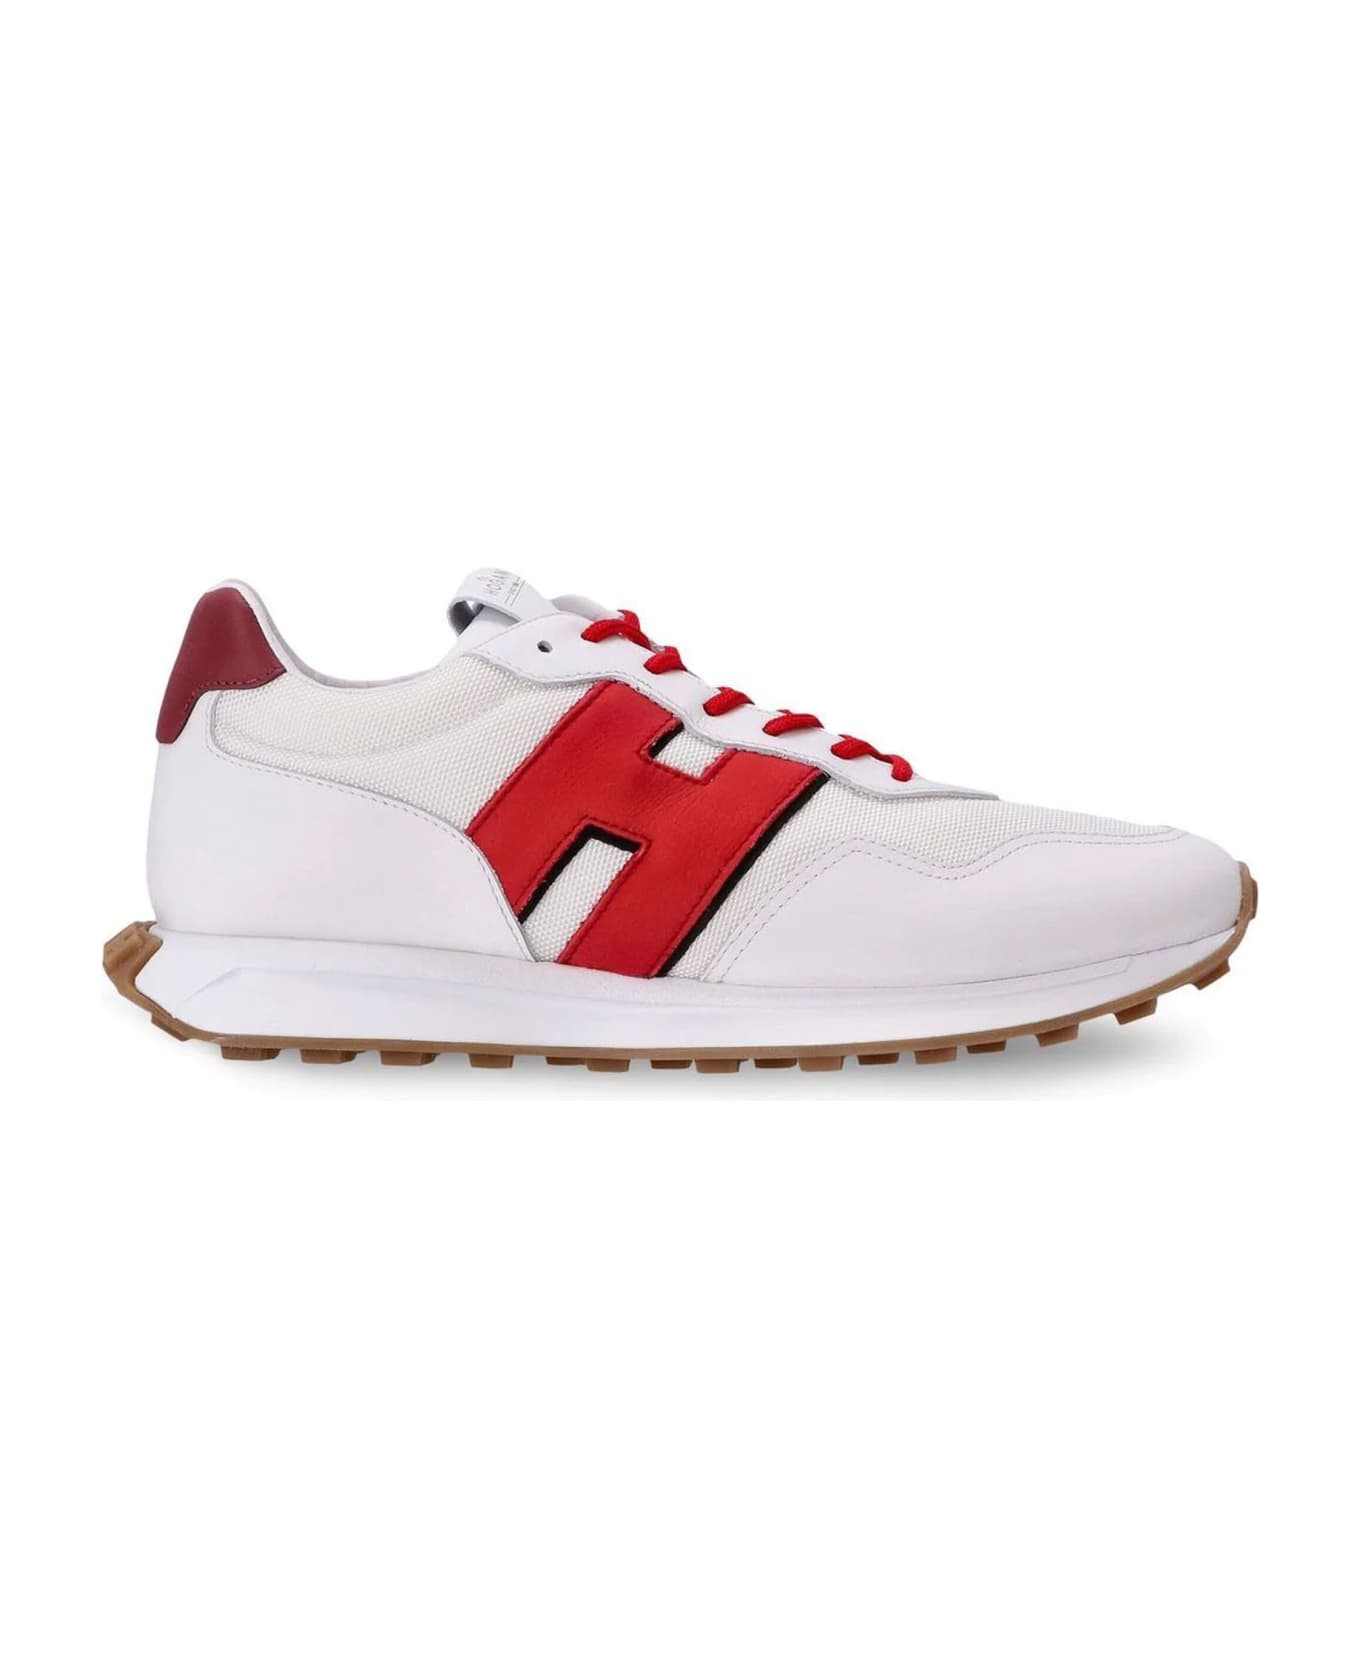 Hogan H601 Sneakers - BIANCO ROSSO